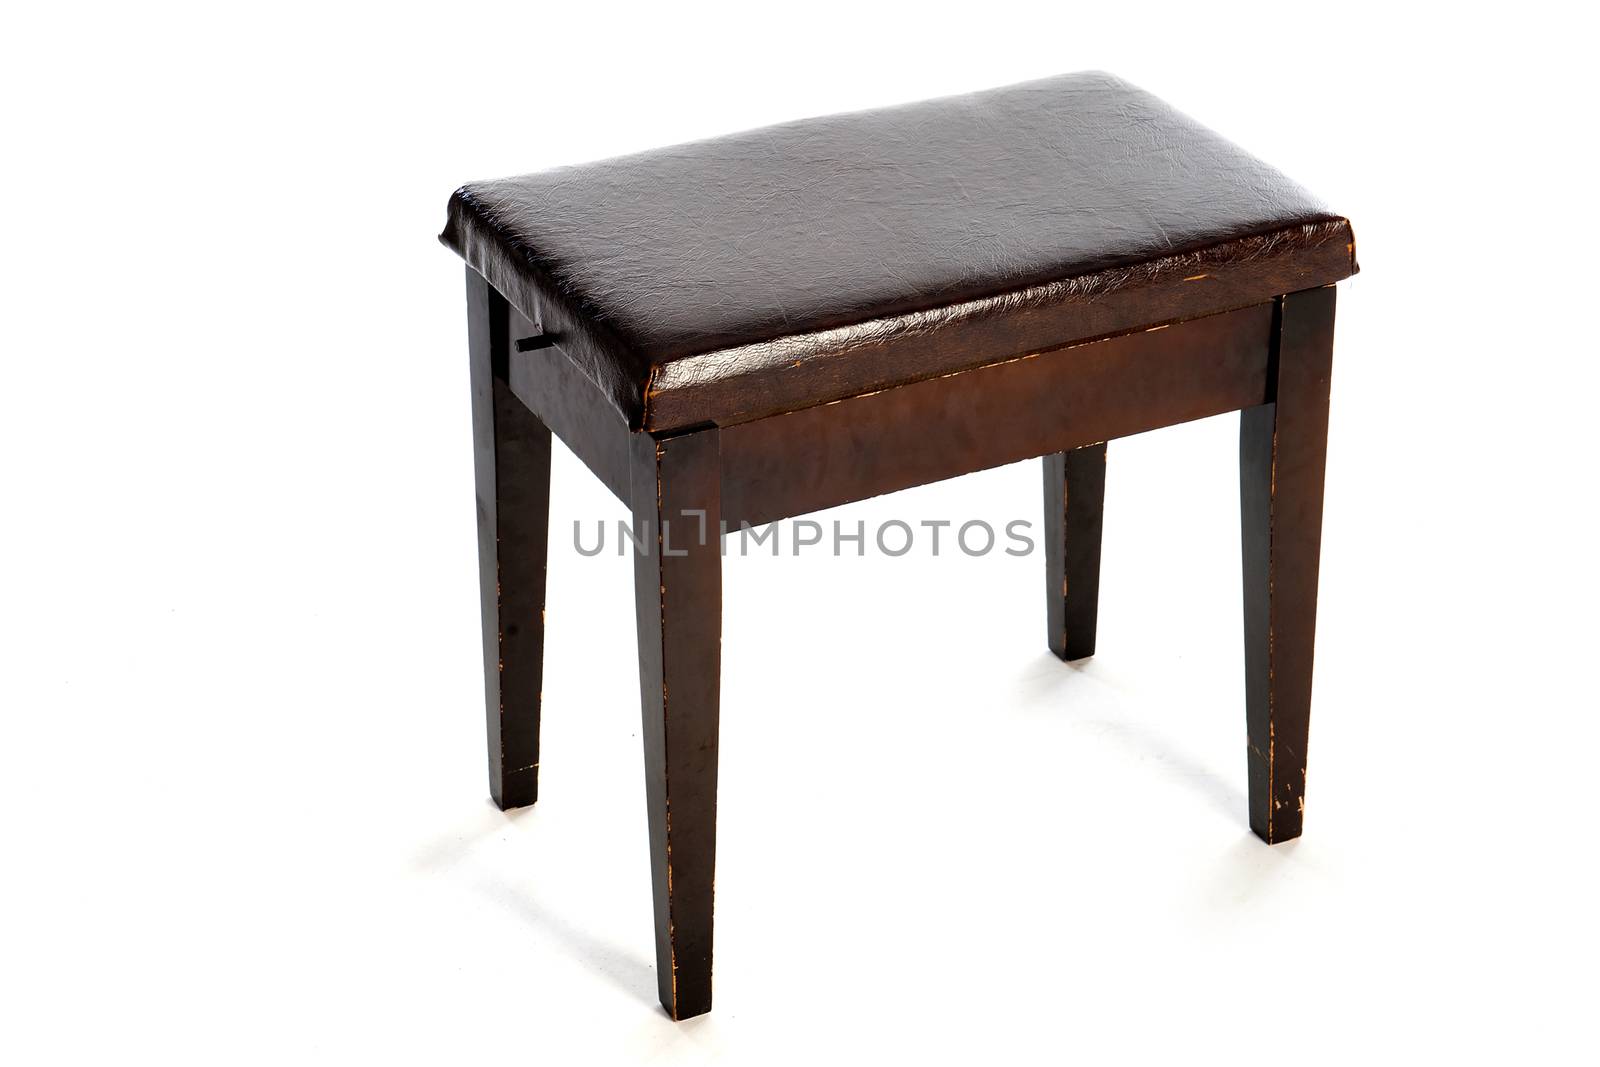 an old piano stool on a white background